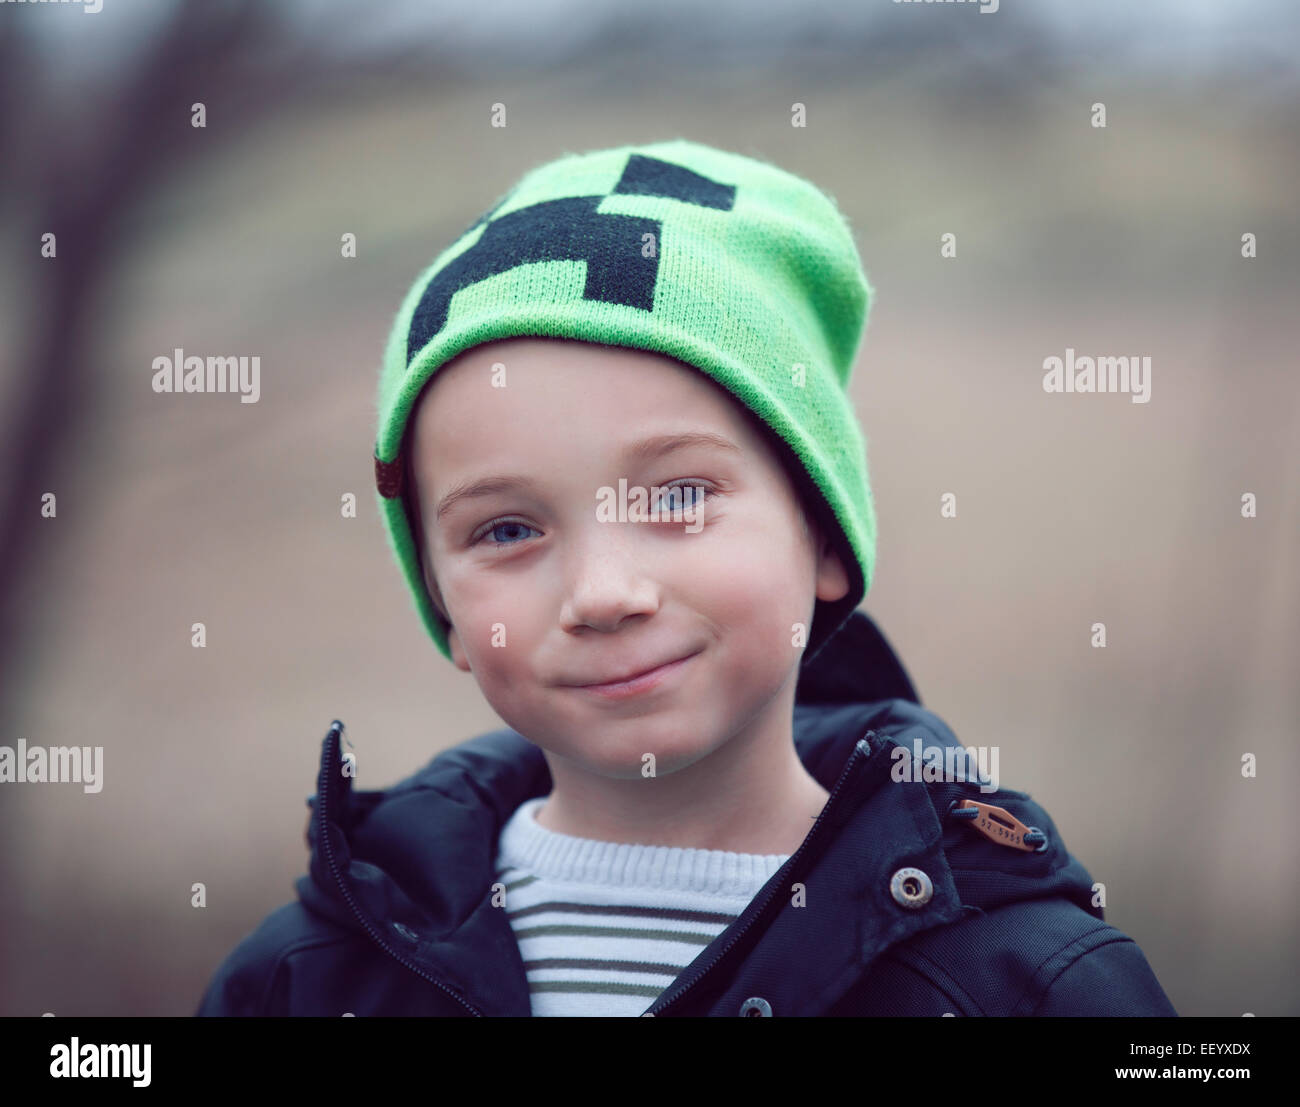 Portrait of young boy wearing green hat Stock Photo